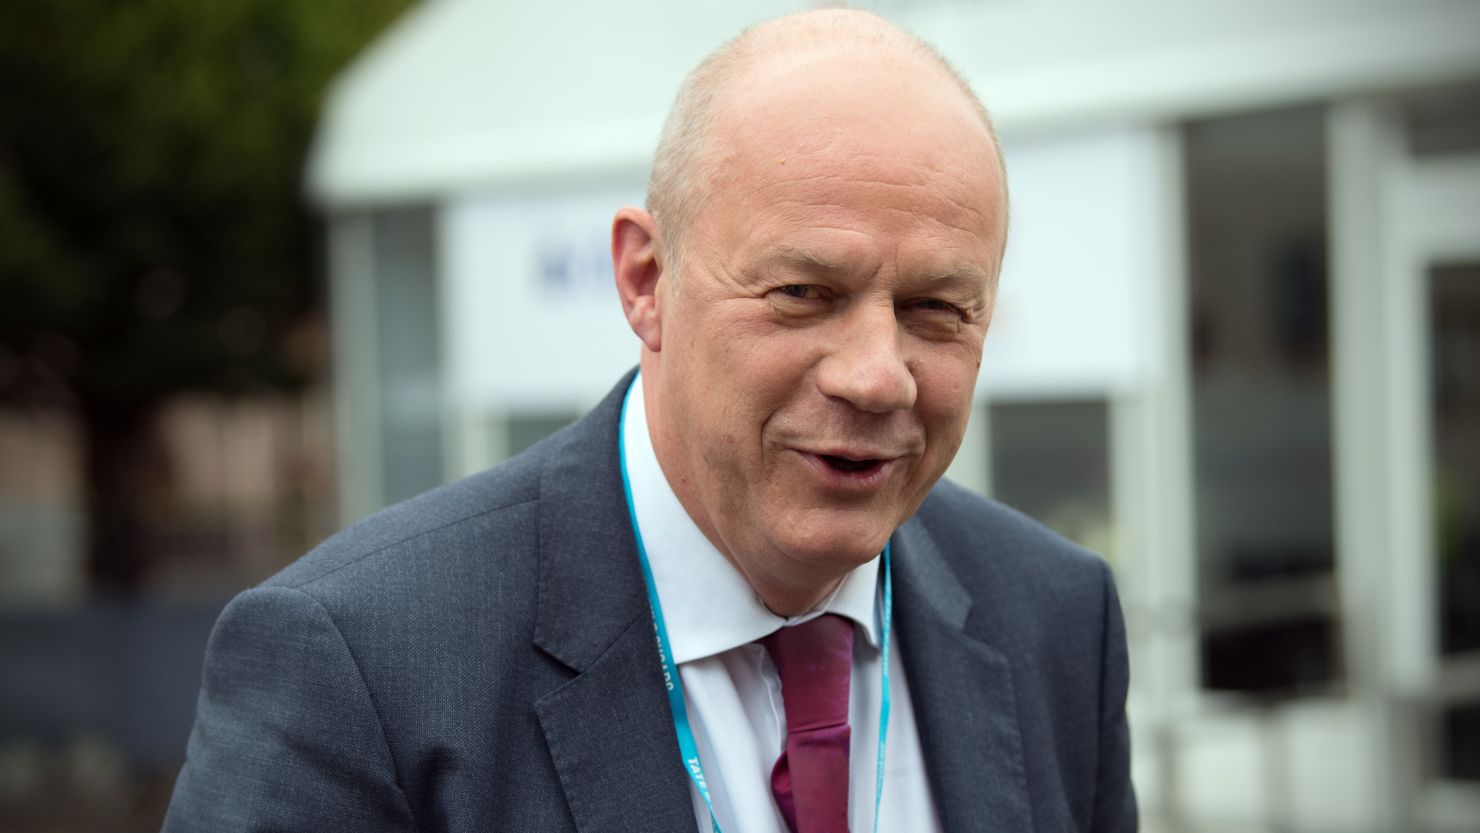 First Secretary of State Damian Green has denied the allegations.